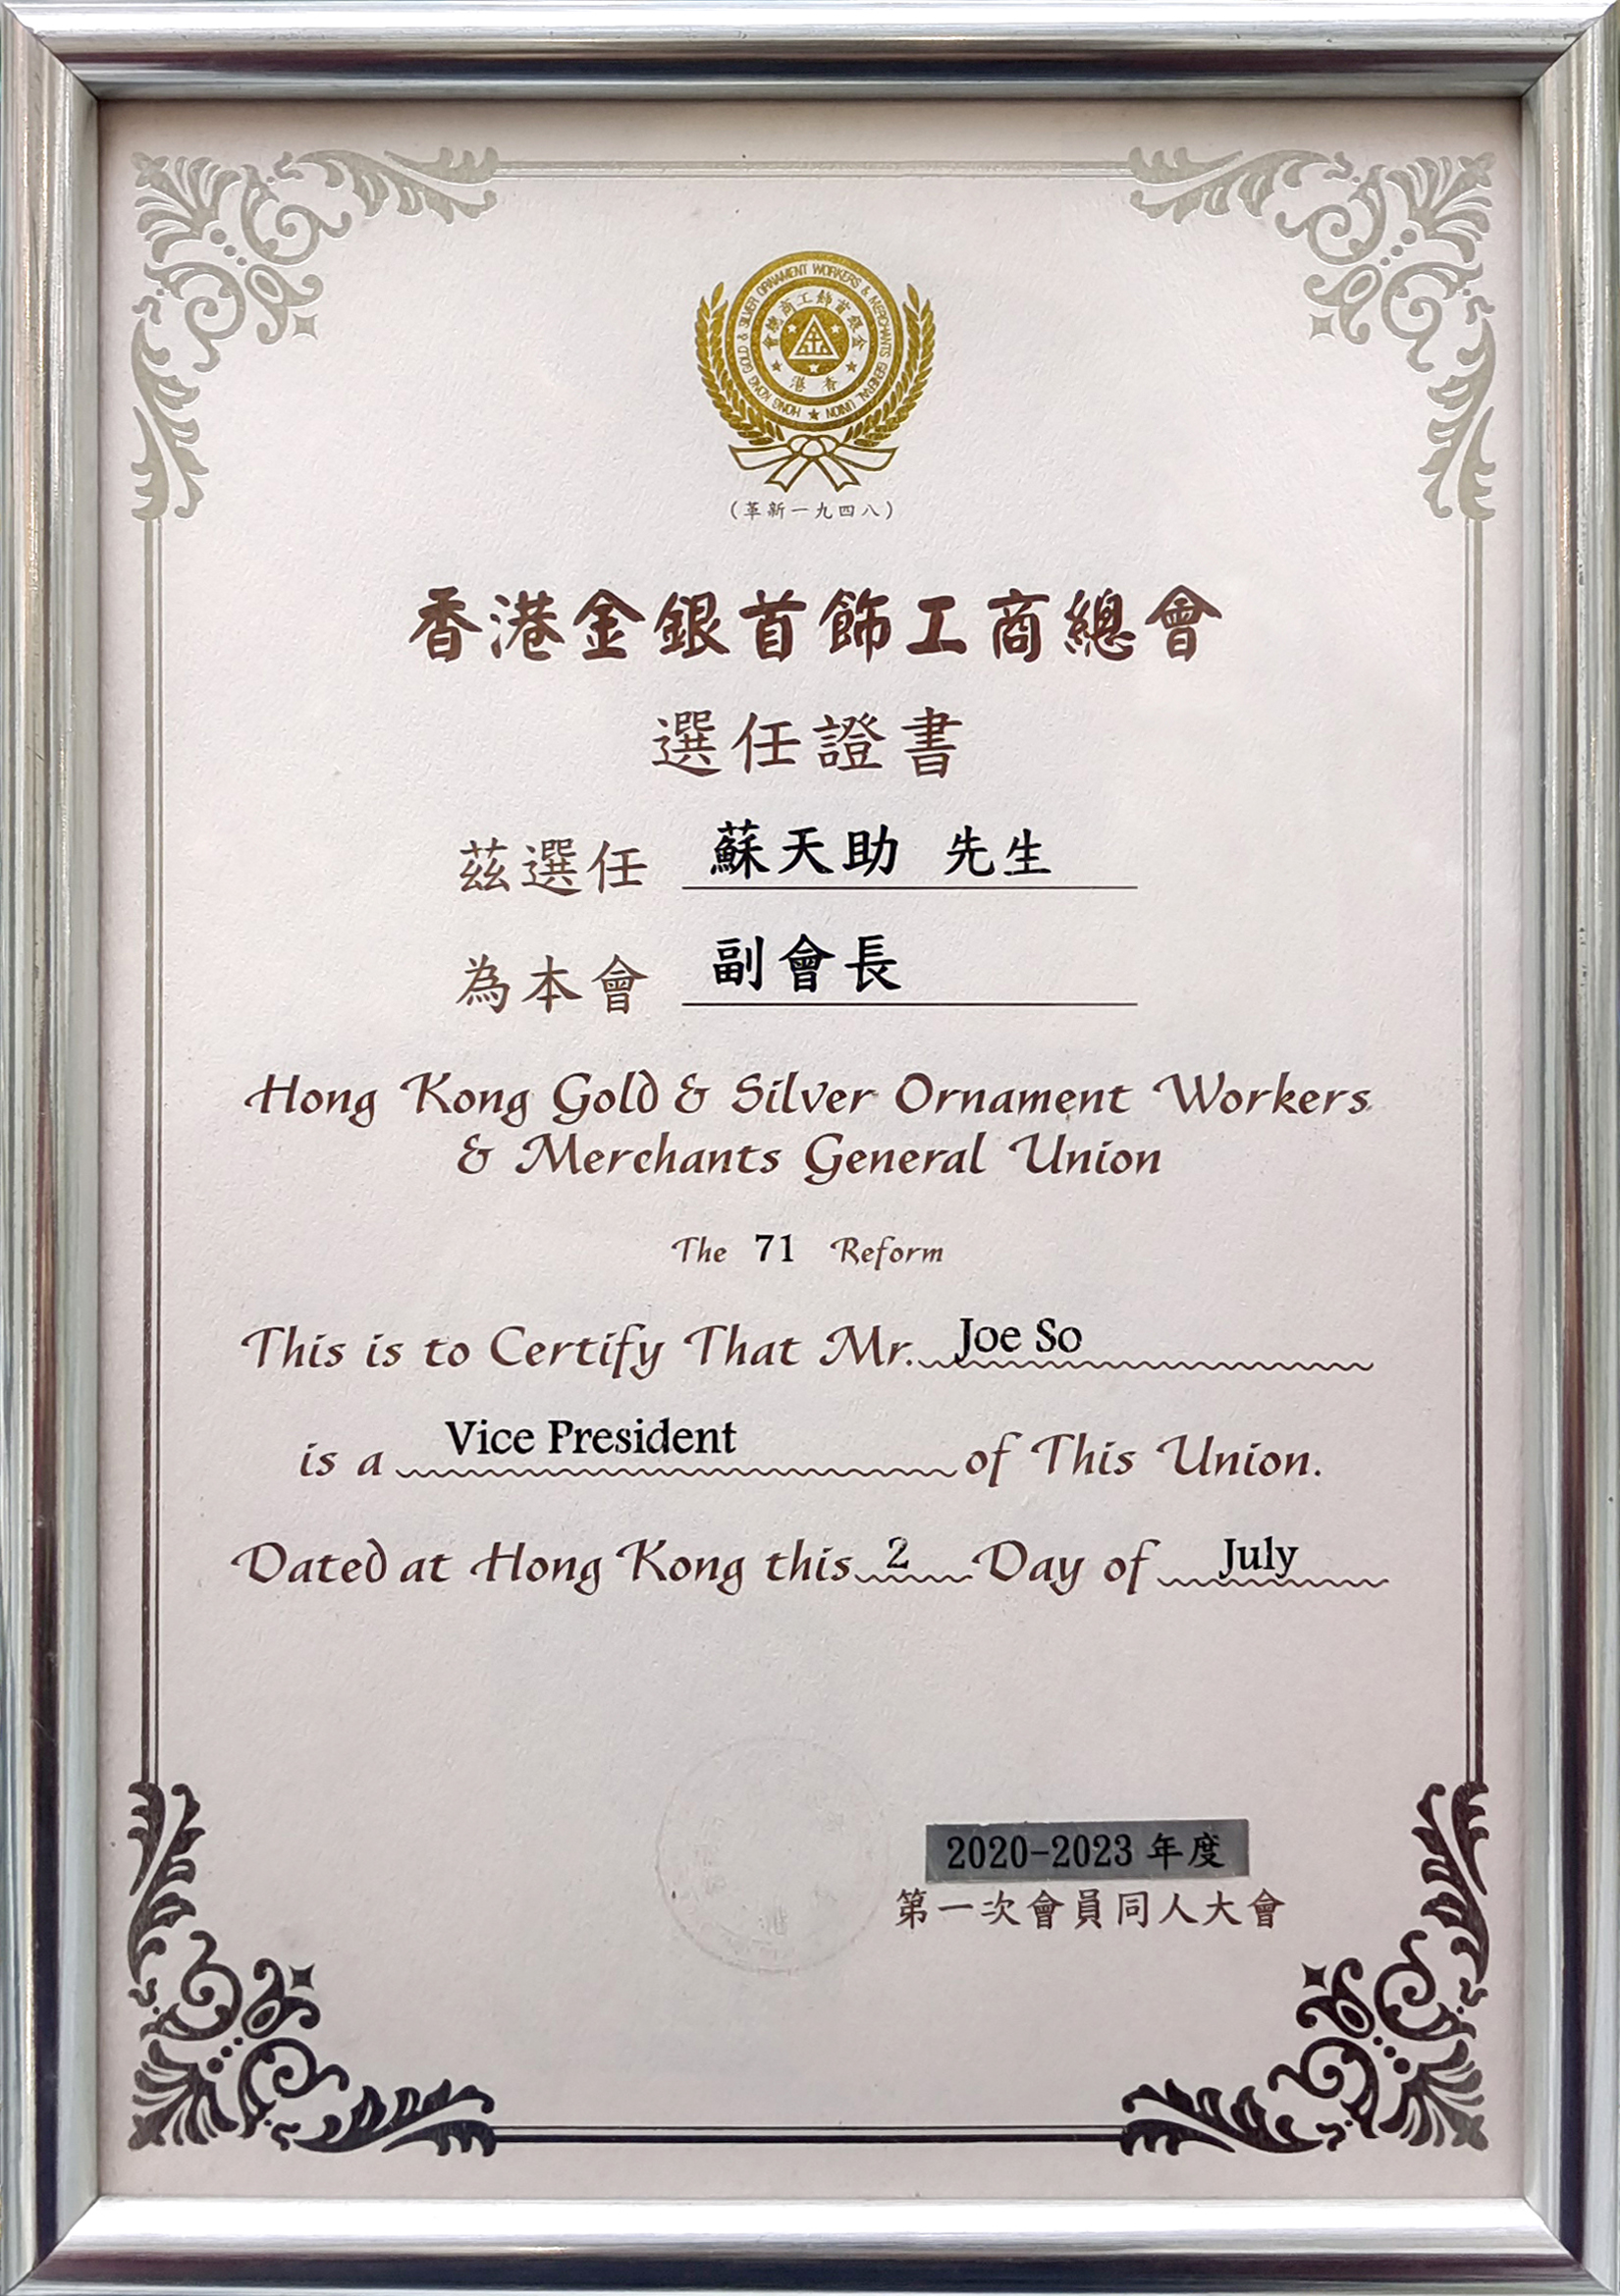 Hong Kong Gold & Silver Ornament Workers & Merchants General Union